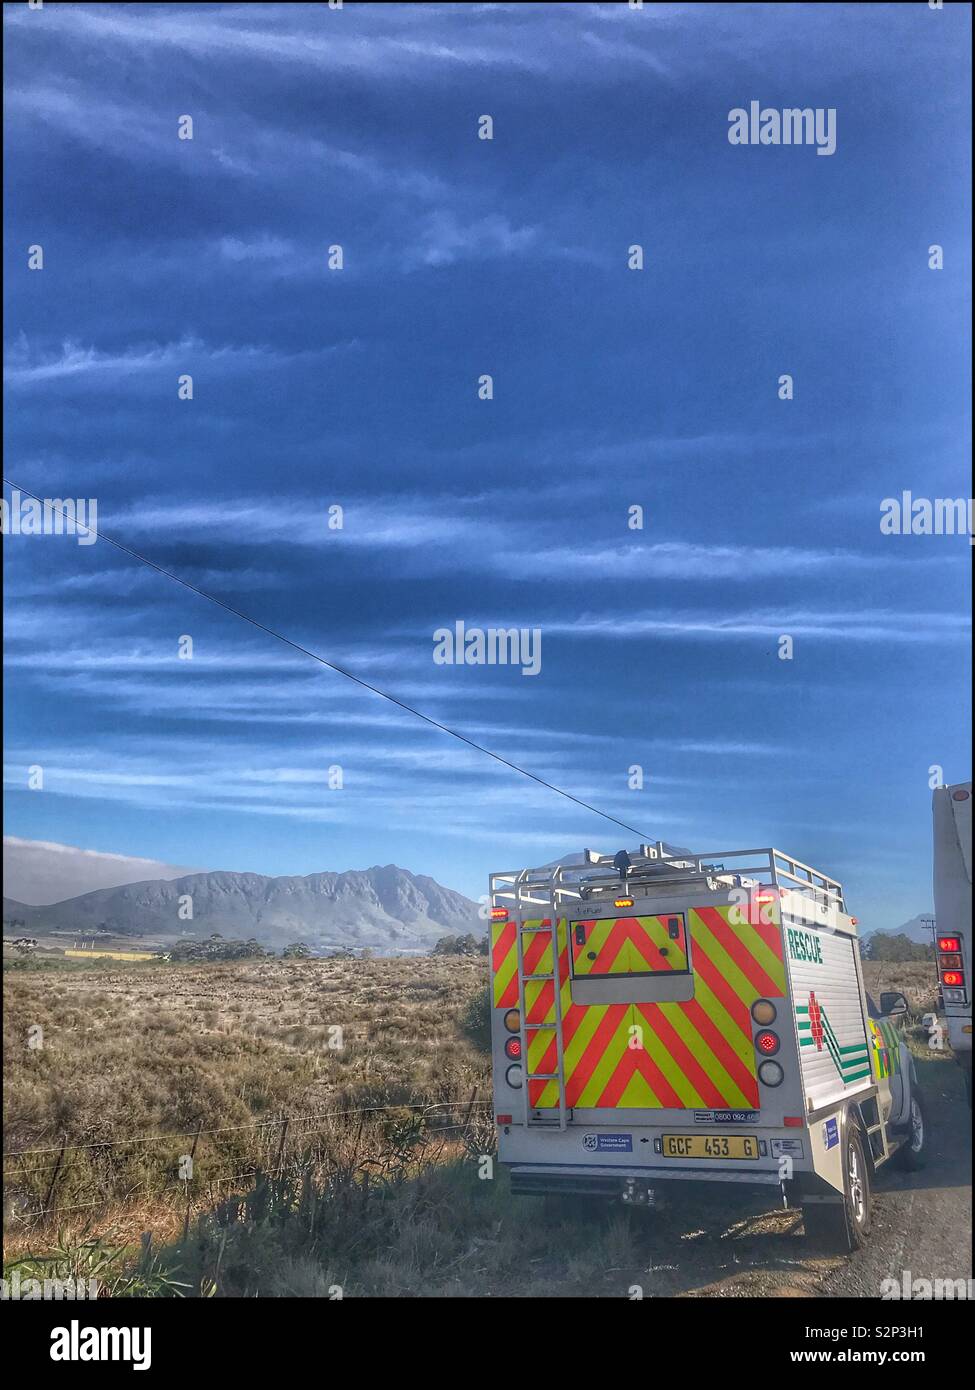 Emergency vehicle in country side. Stock Photo